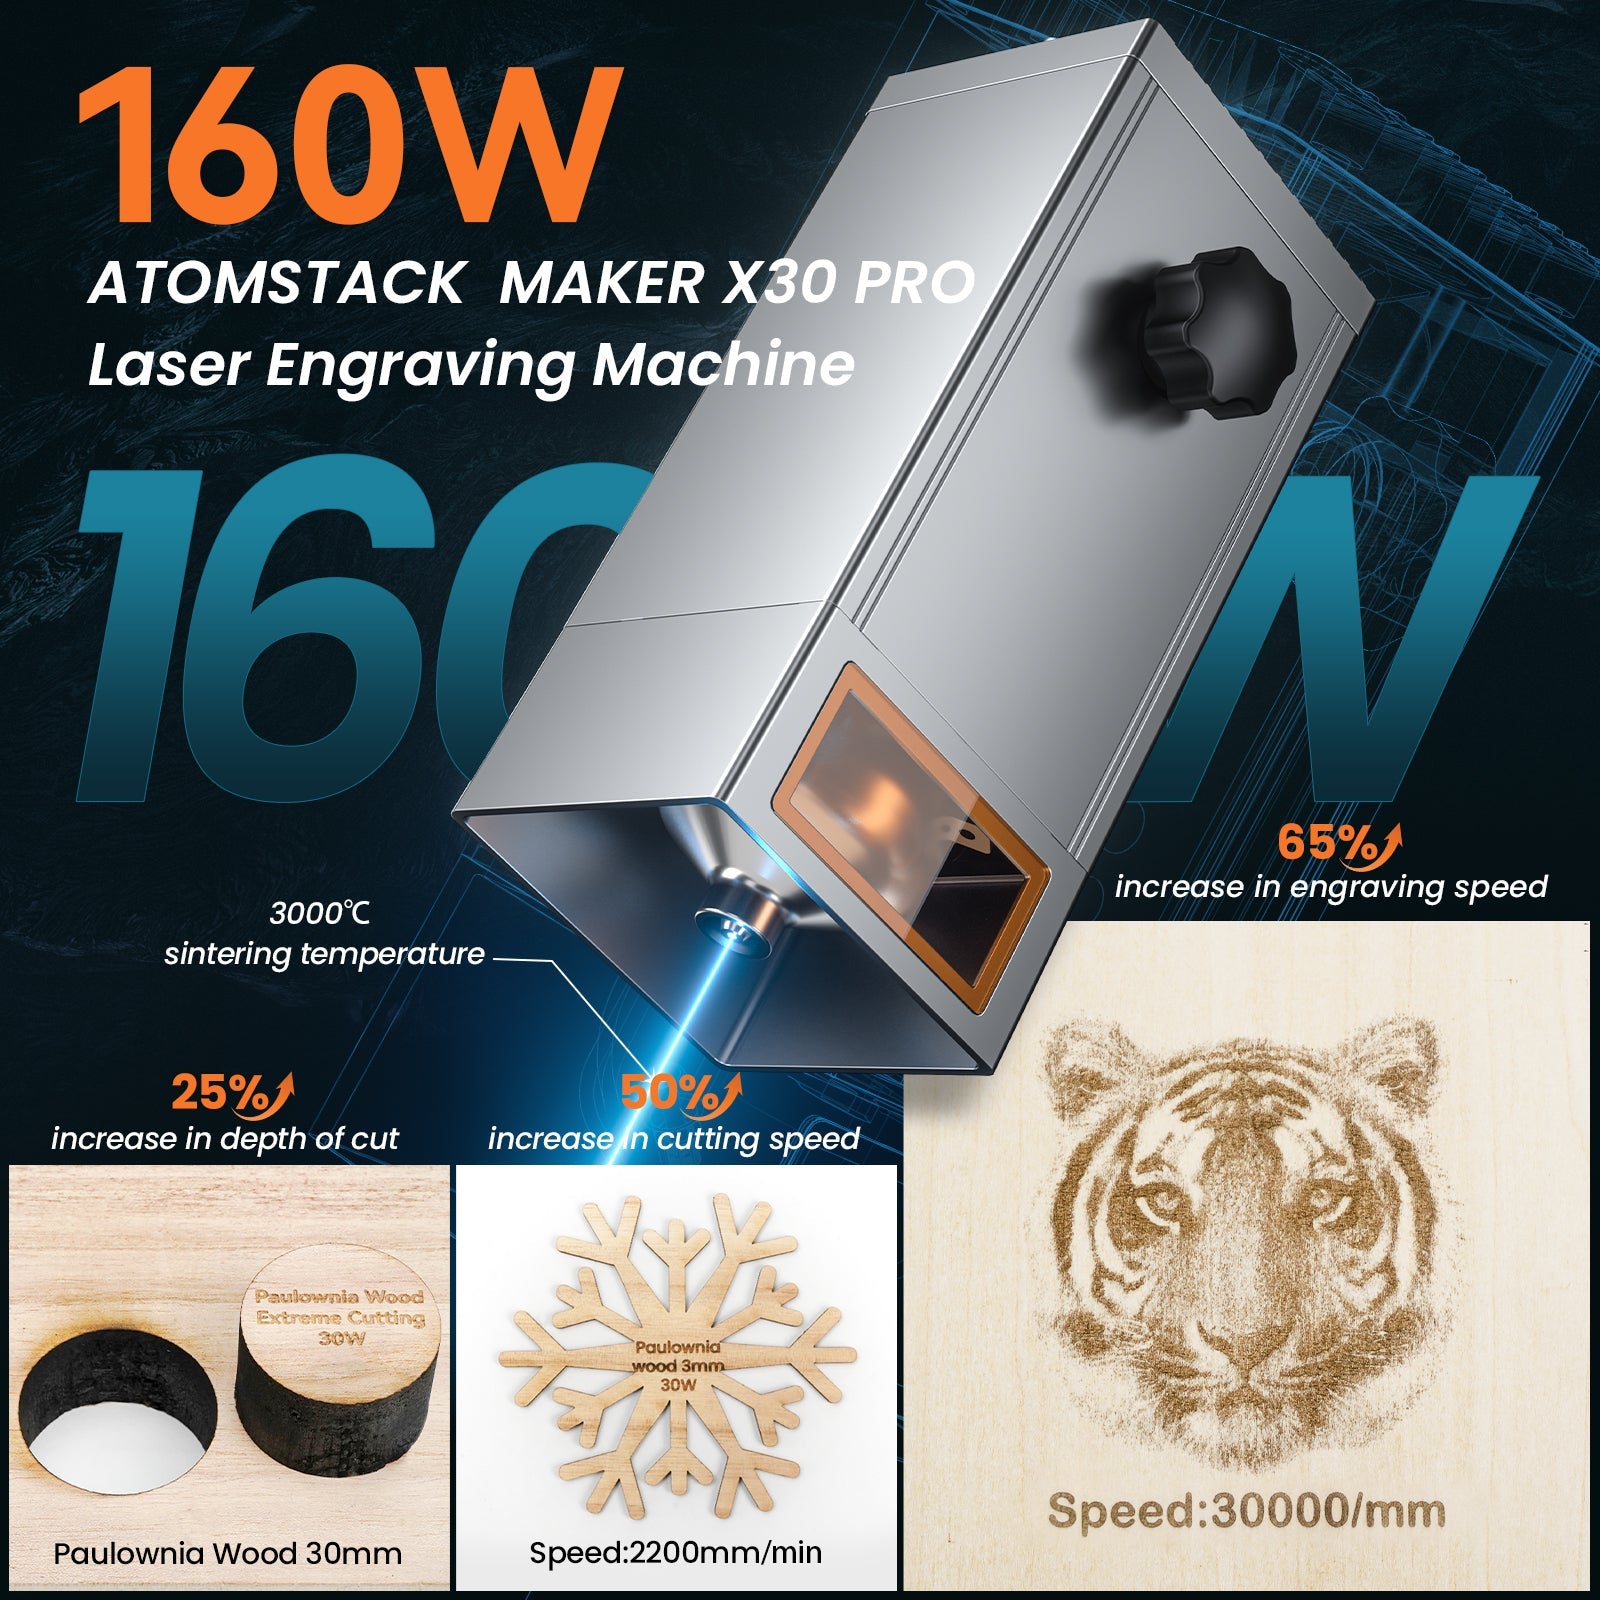 Atomstack X30 Pro 160W Laser Engraving Machine + Atomstack F2 Honeycomb Working Panel